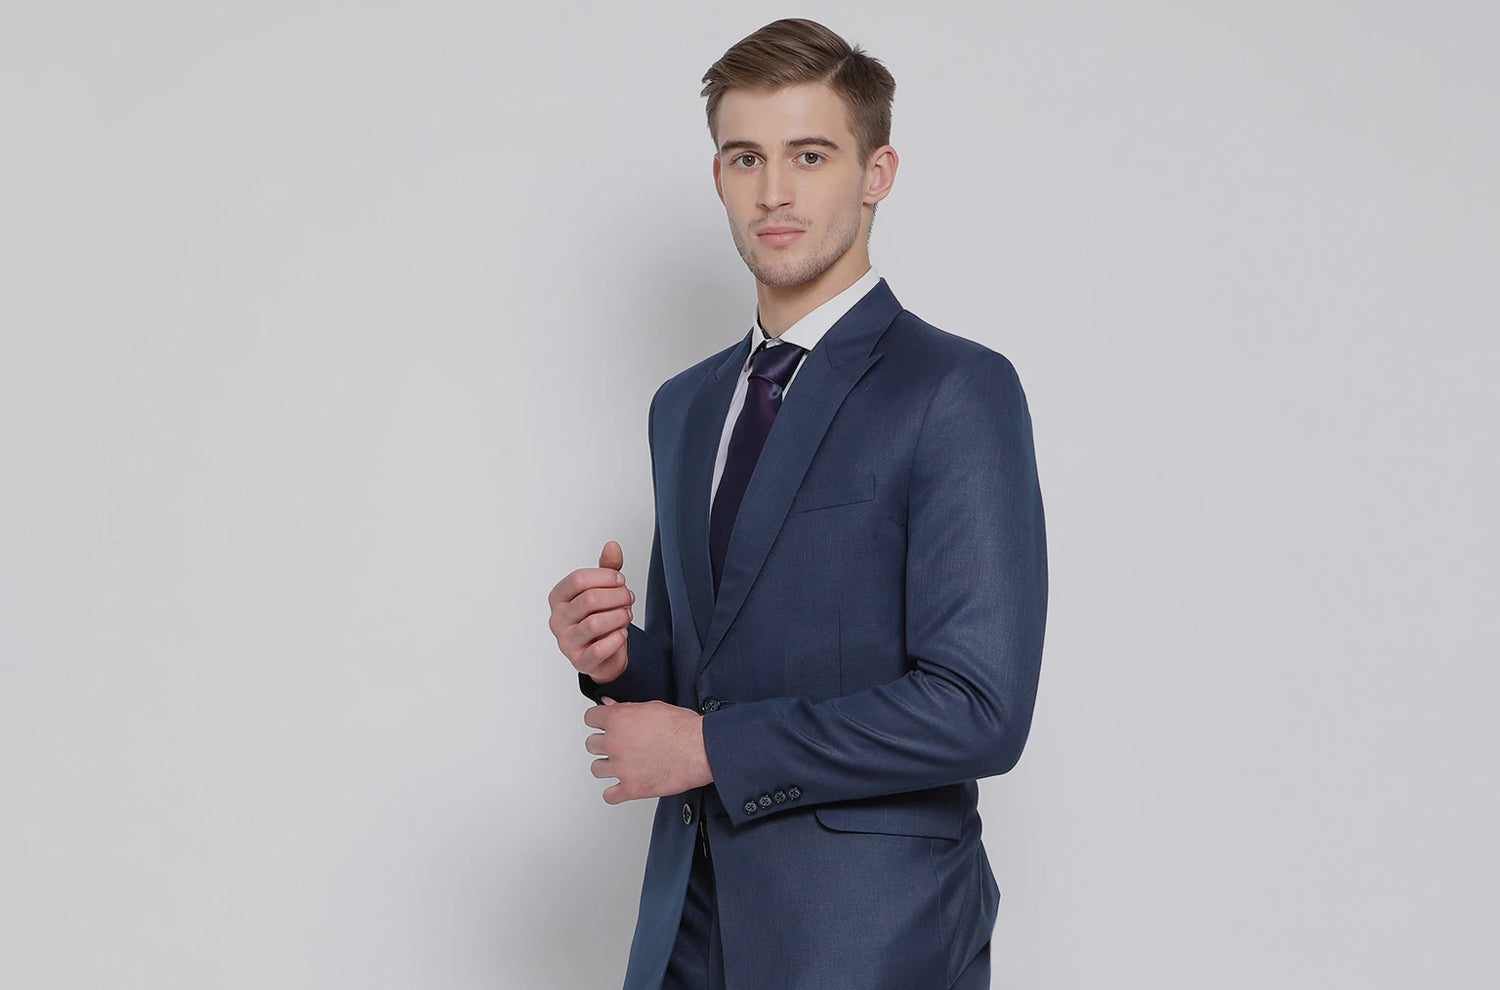 <span style="color: #fff; font-family: leaguegothic-regular" class="h1 uppercase">Meet The Suit That Sets You Apart</span>